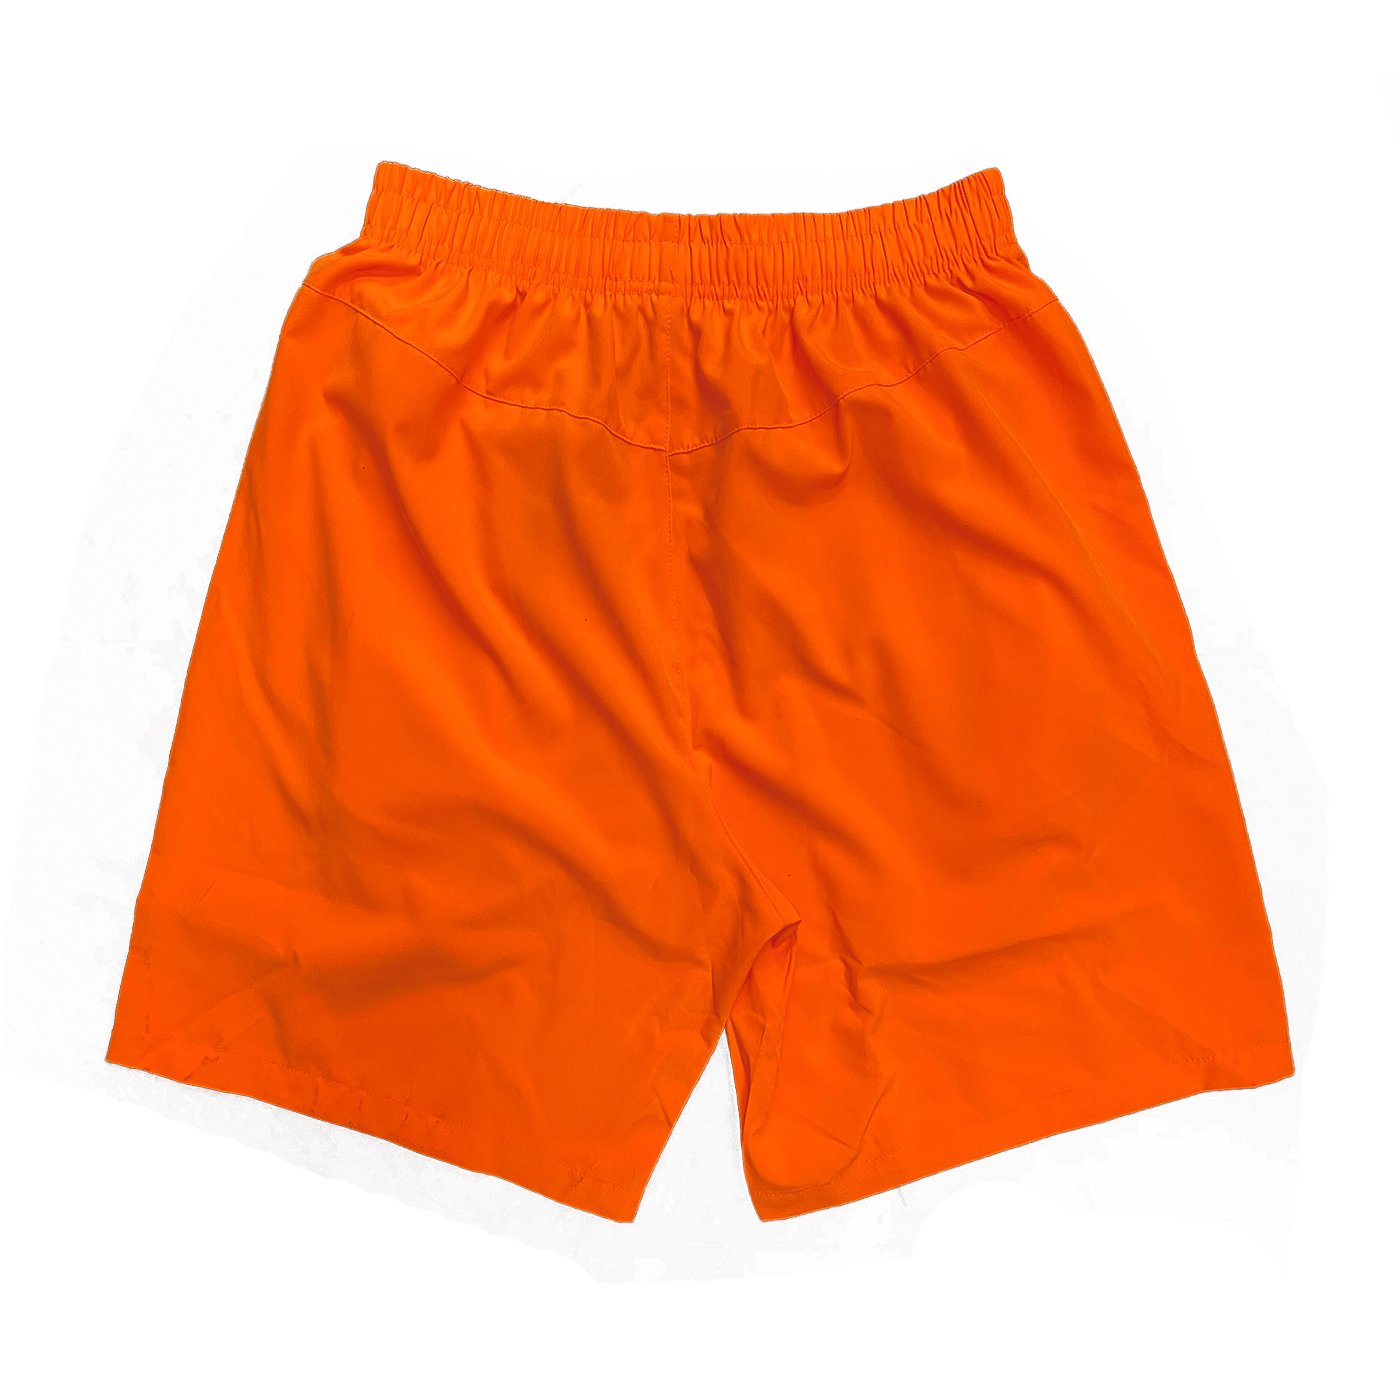 Picture of a Men's Performance Orange Running Shorts back view